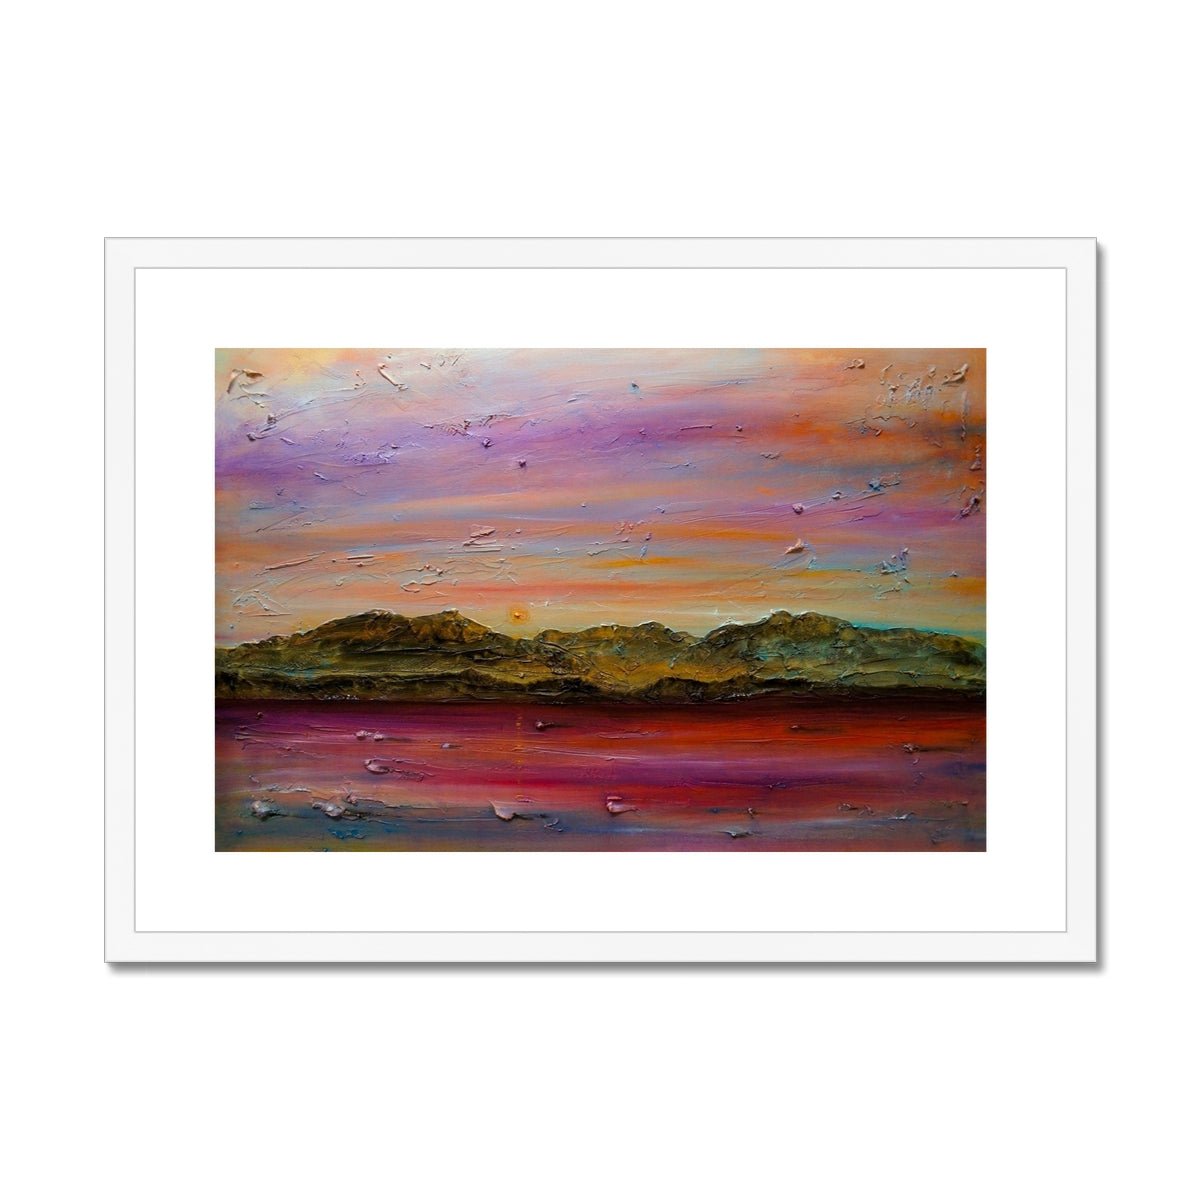 Arran Autumn Dusk Painting | Framed & Mounted Prints From Scotland-Framed & Mounted Prints-Arran Art Gallery-A2 Landscape-White Frame-Paintings, Prints, Homeware, Art Gifts From Scotland By Scottish Artist Kevin Hunter